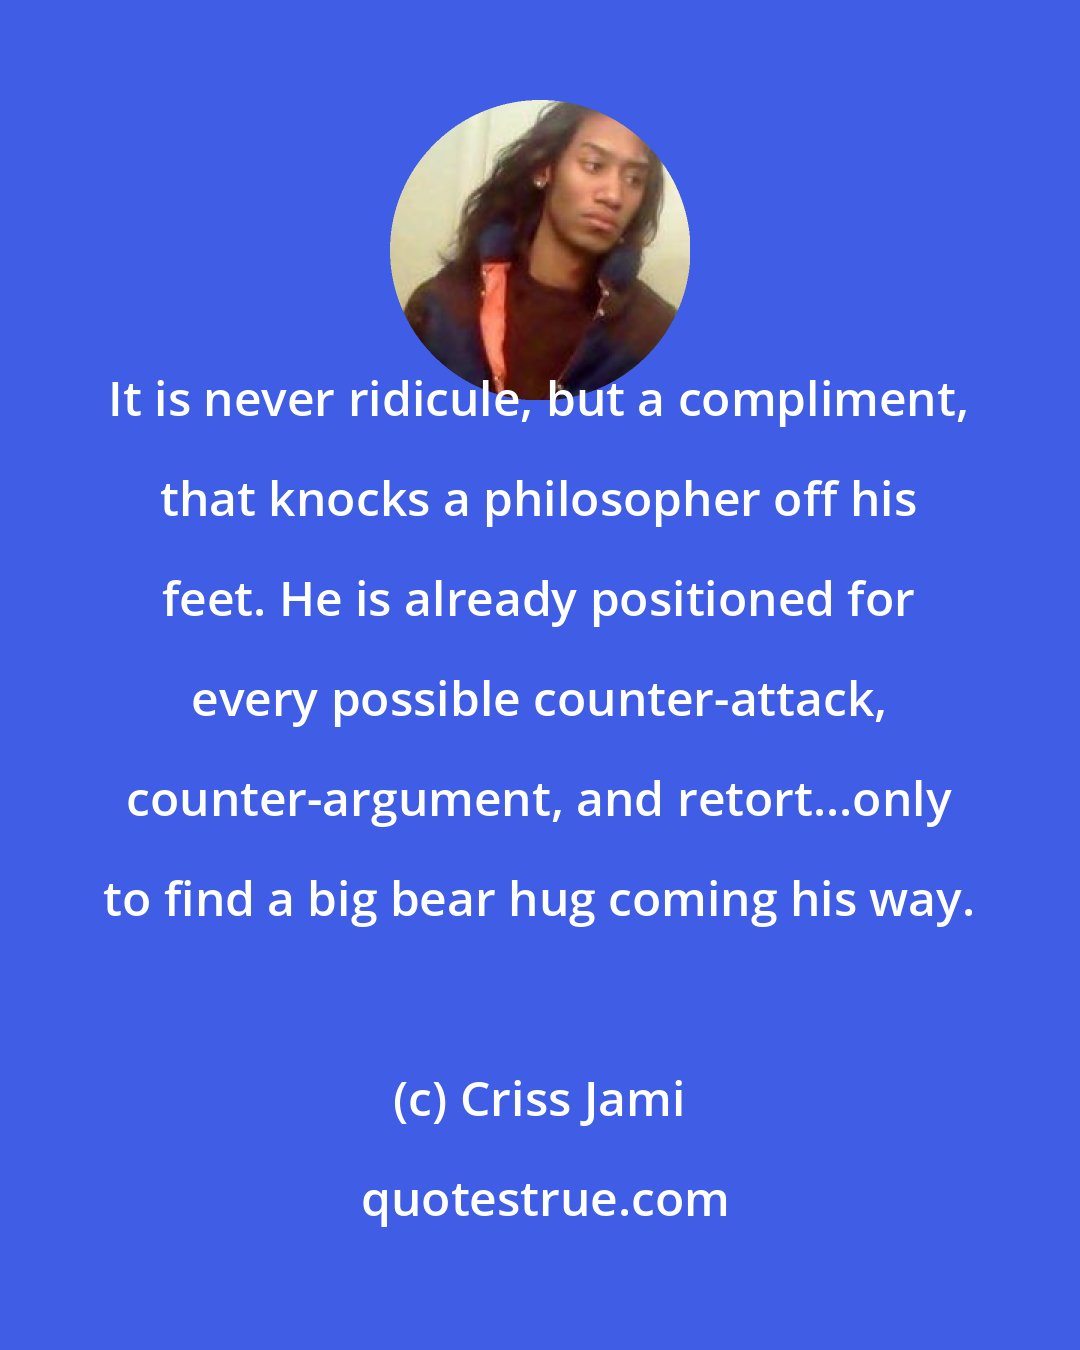 Criss Jami: It is never ridicule, but a compliment, that knocks a philosopher off his feet. He is already positioned for every possible counter-attack, counter-argument, and retort...only to find a big bear hug coming his way.